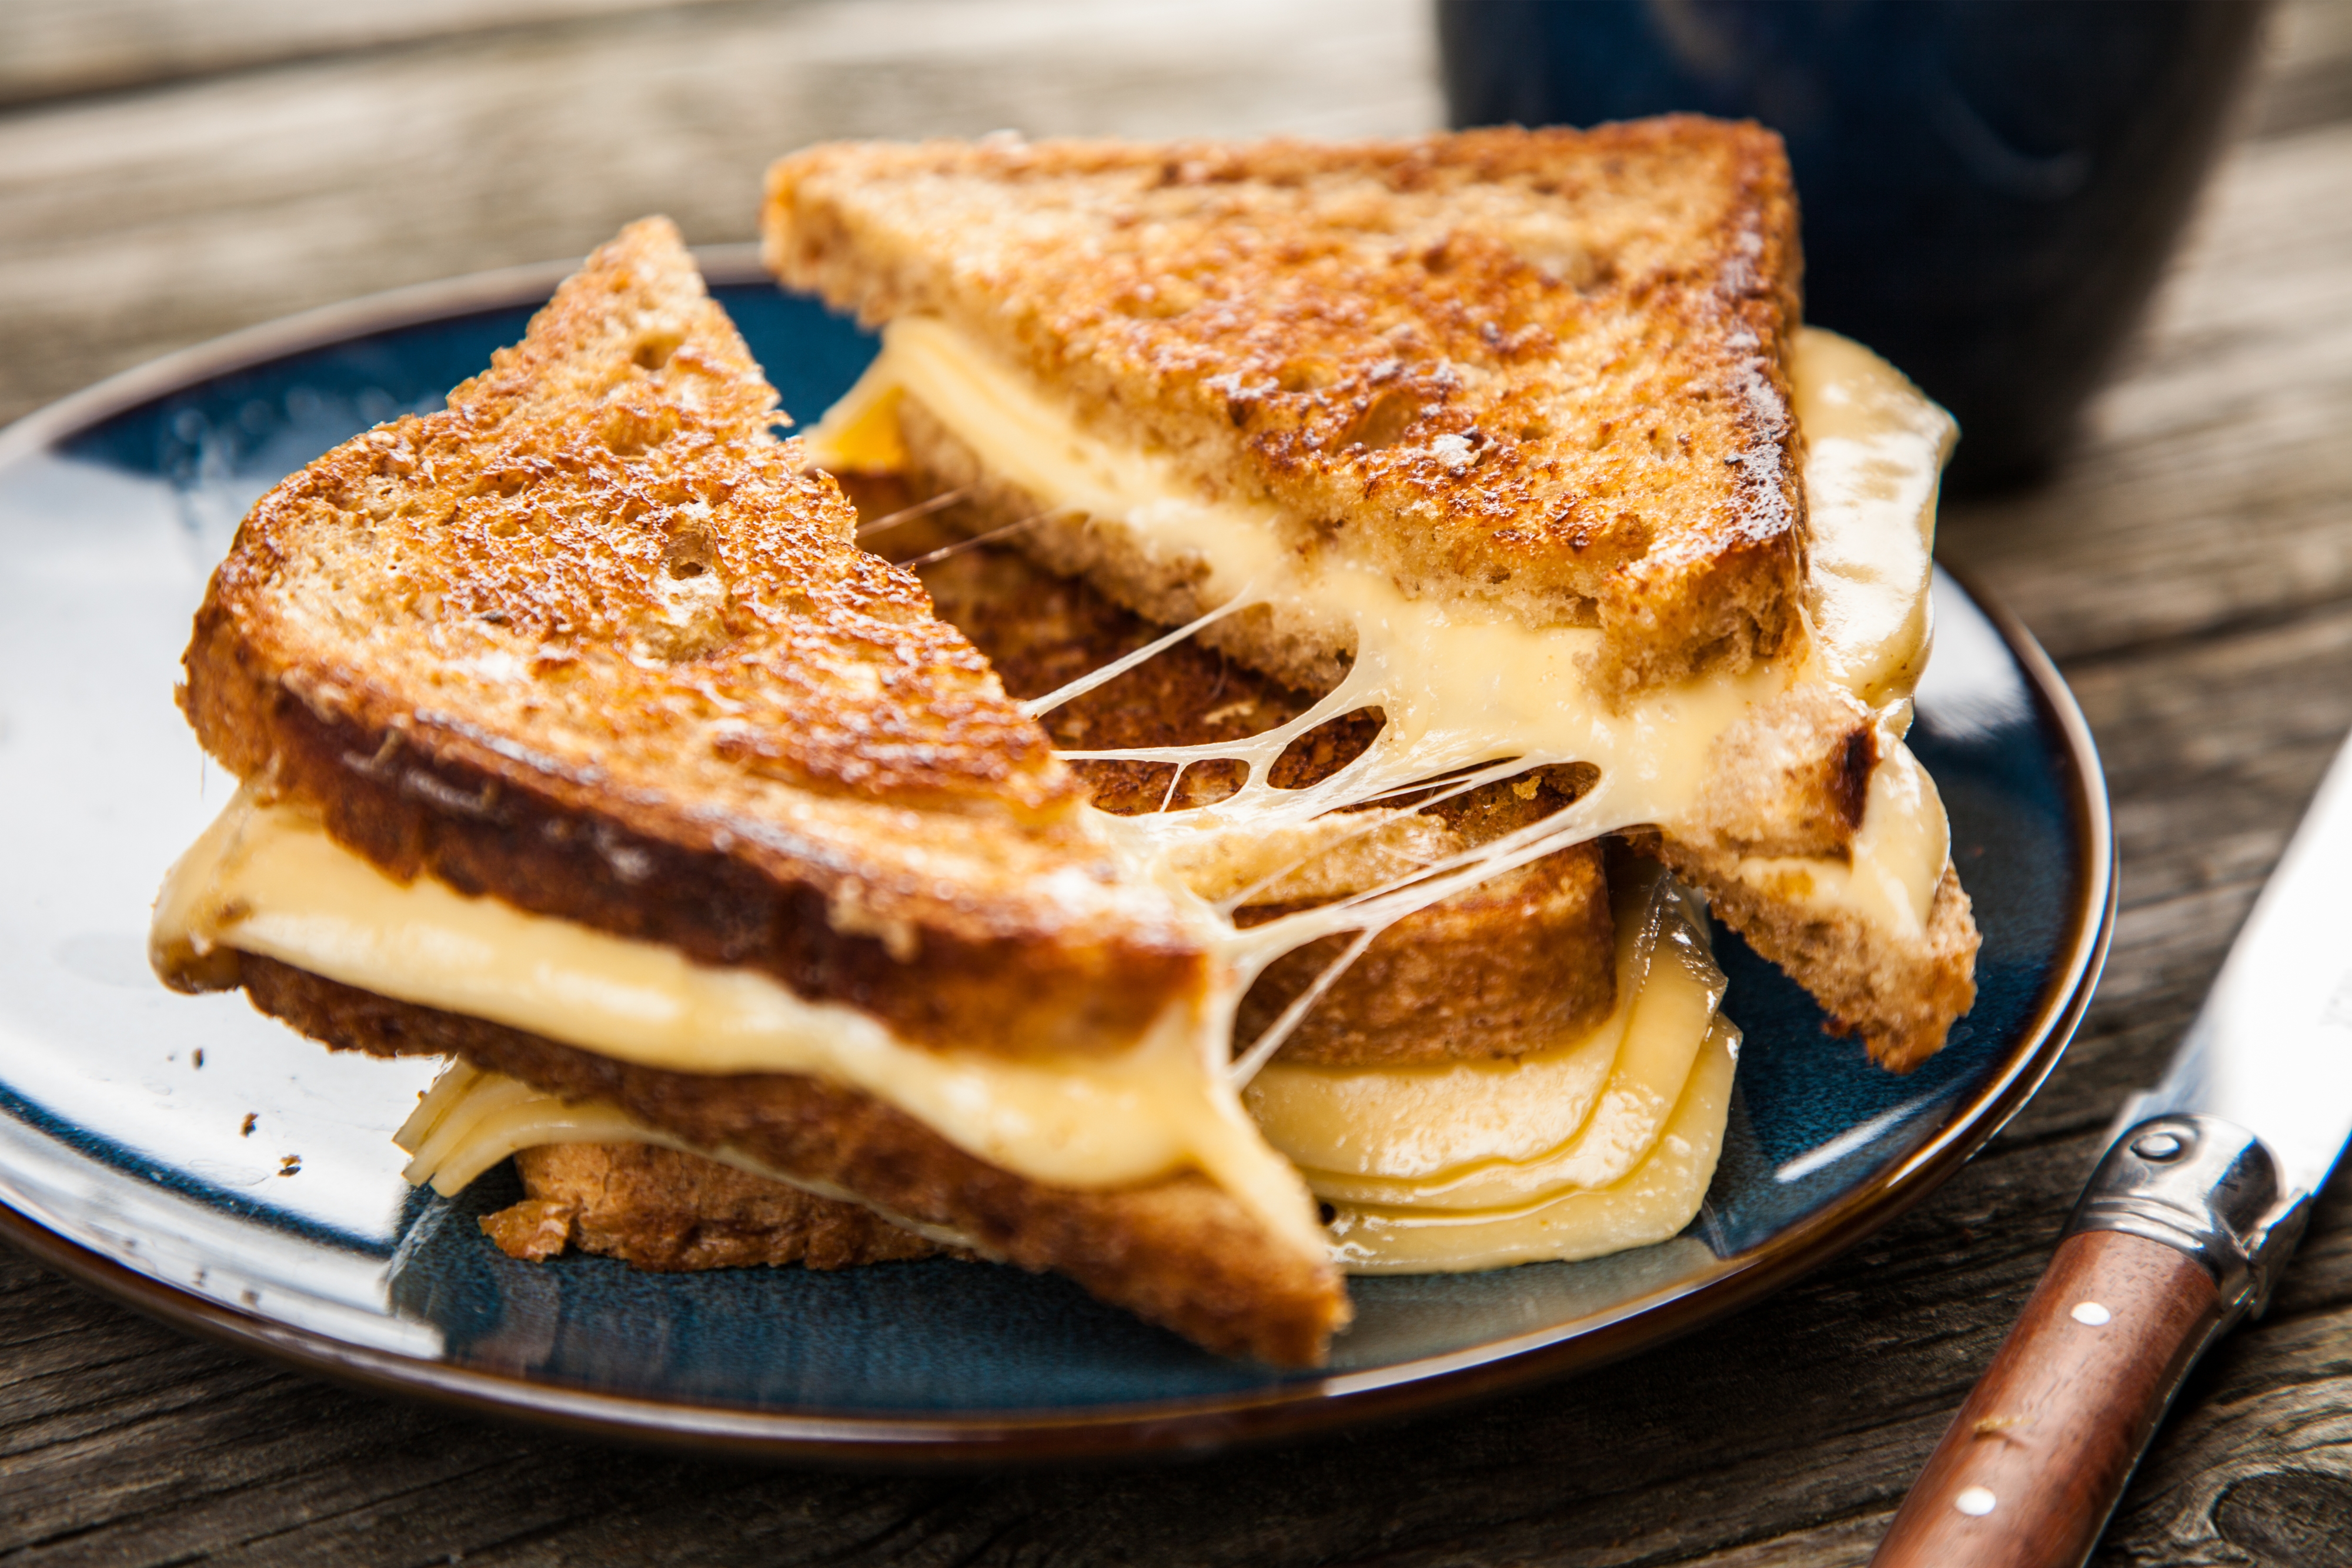 Close-up of grilled cream cheese sandwich on a plate